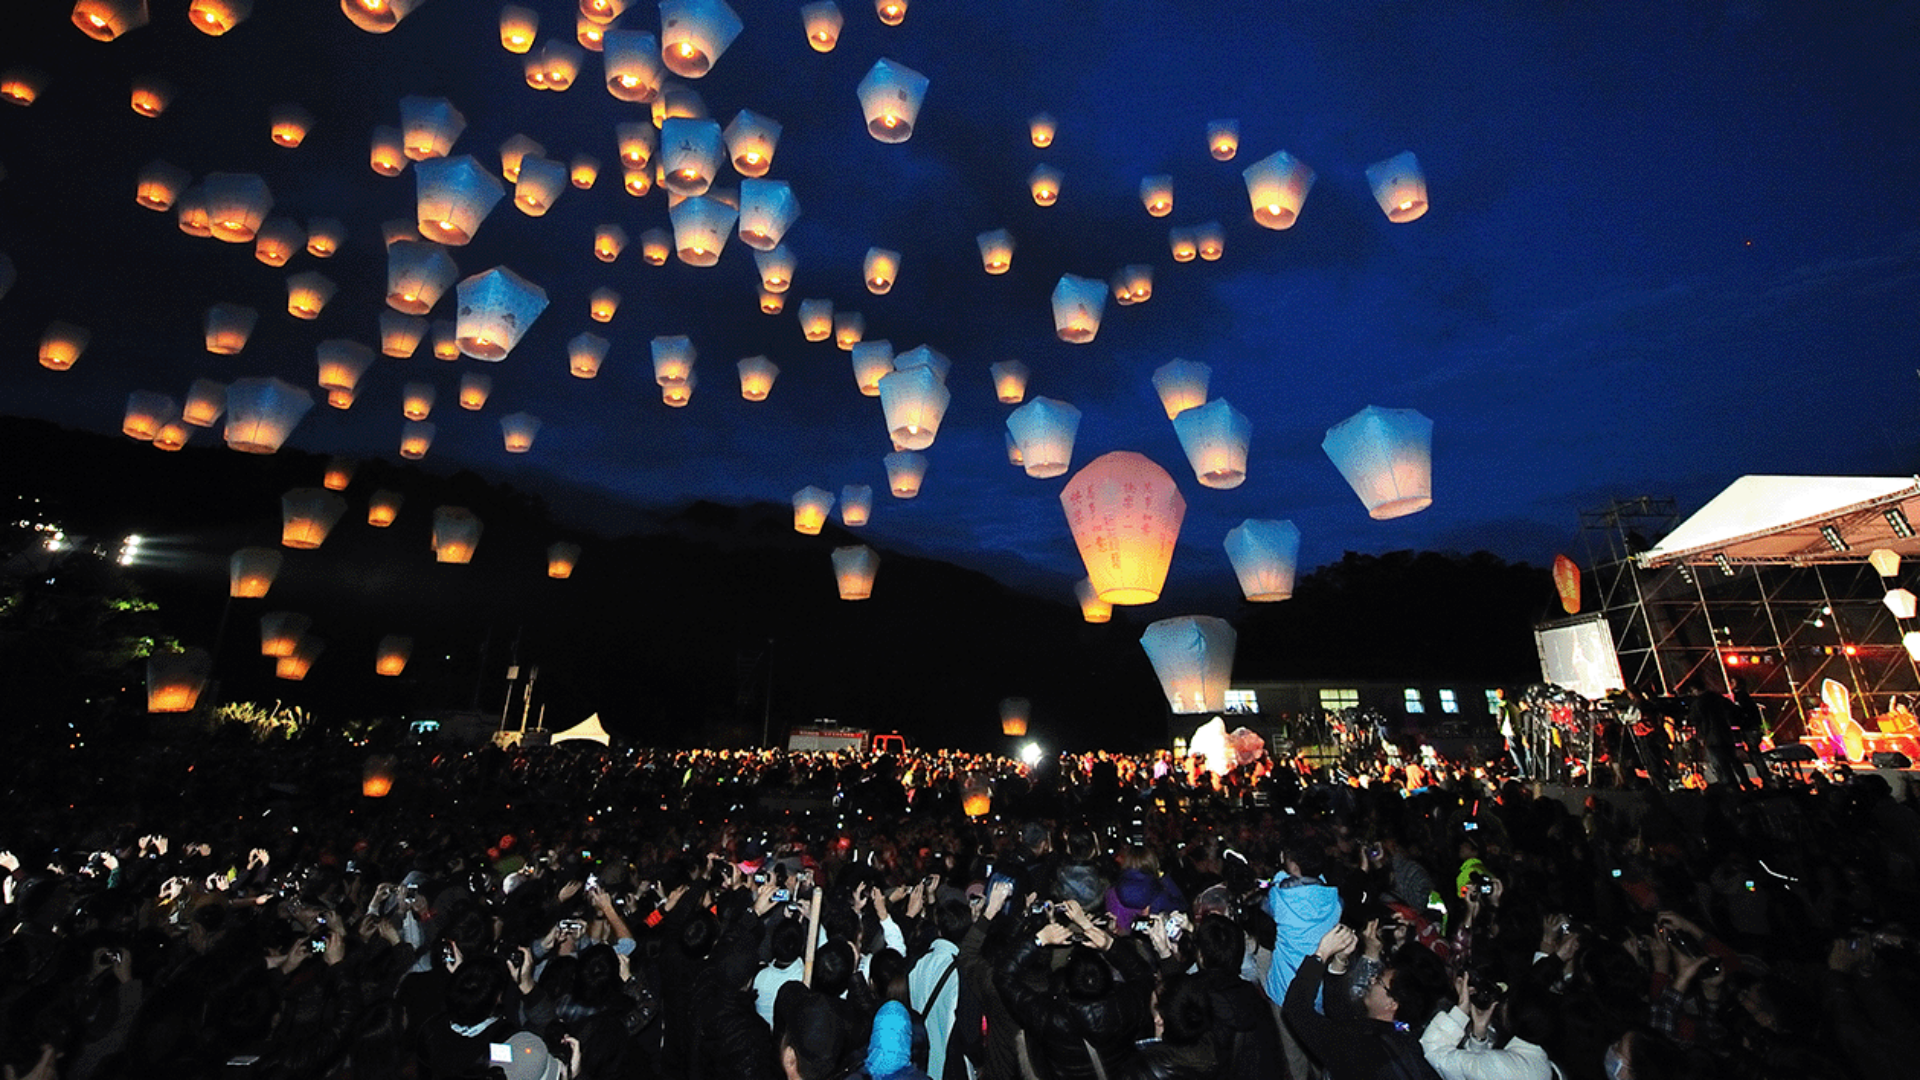 paper lanterns floating in the sky at big event